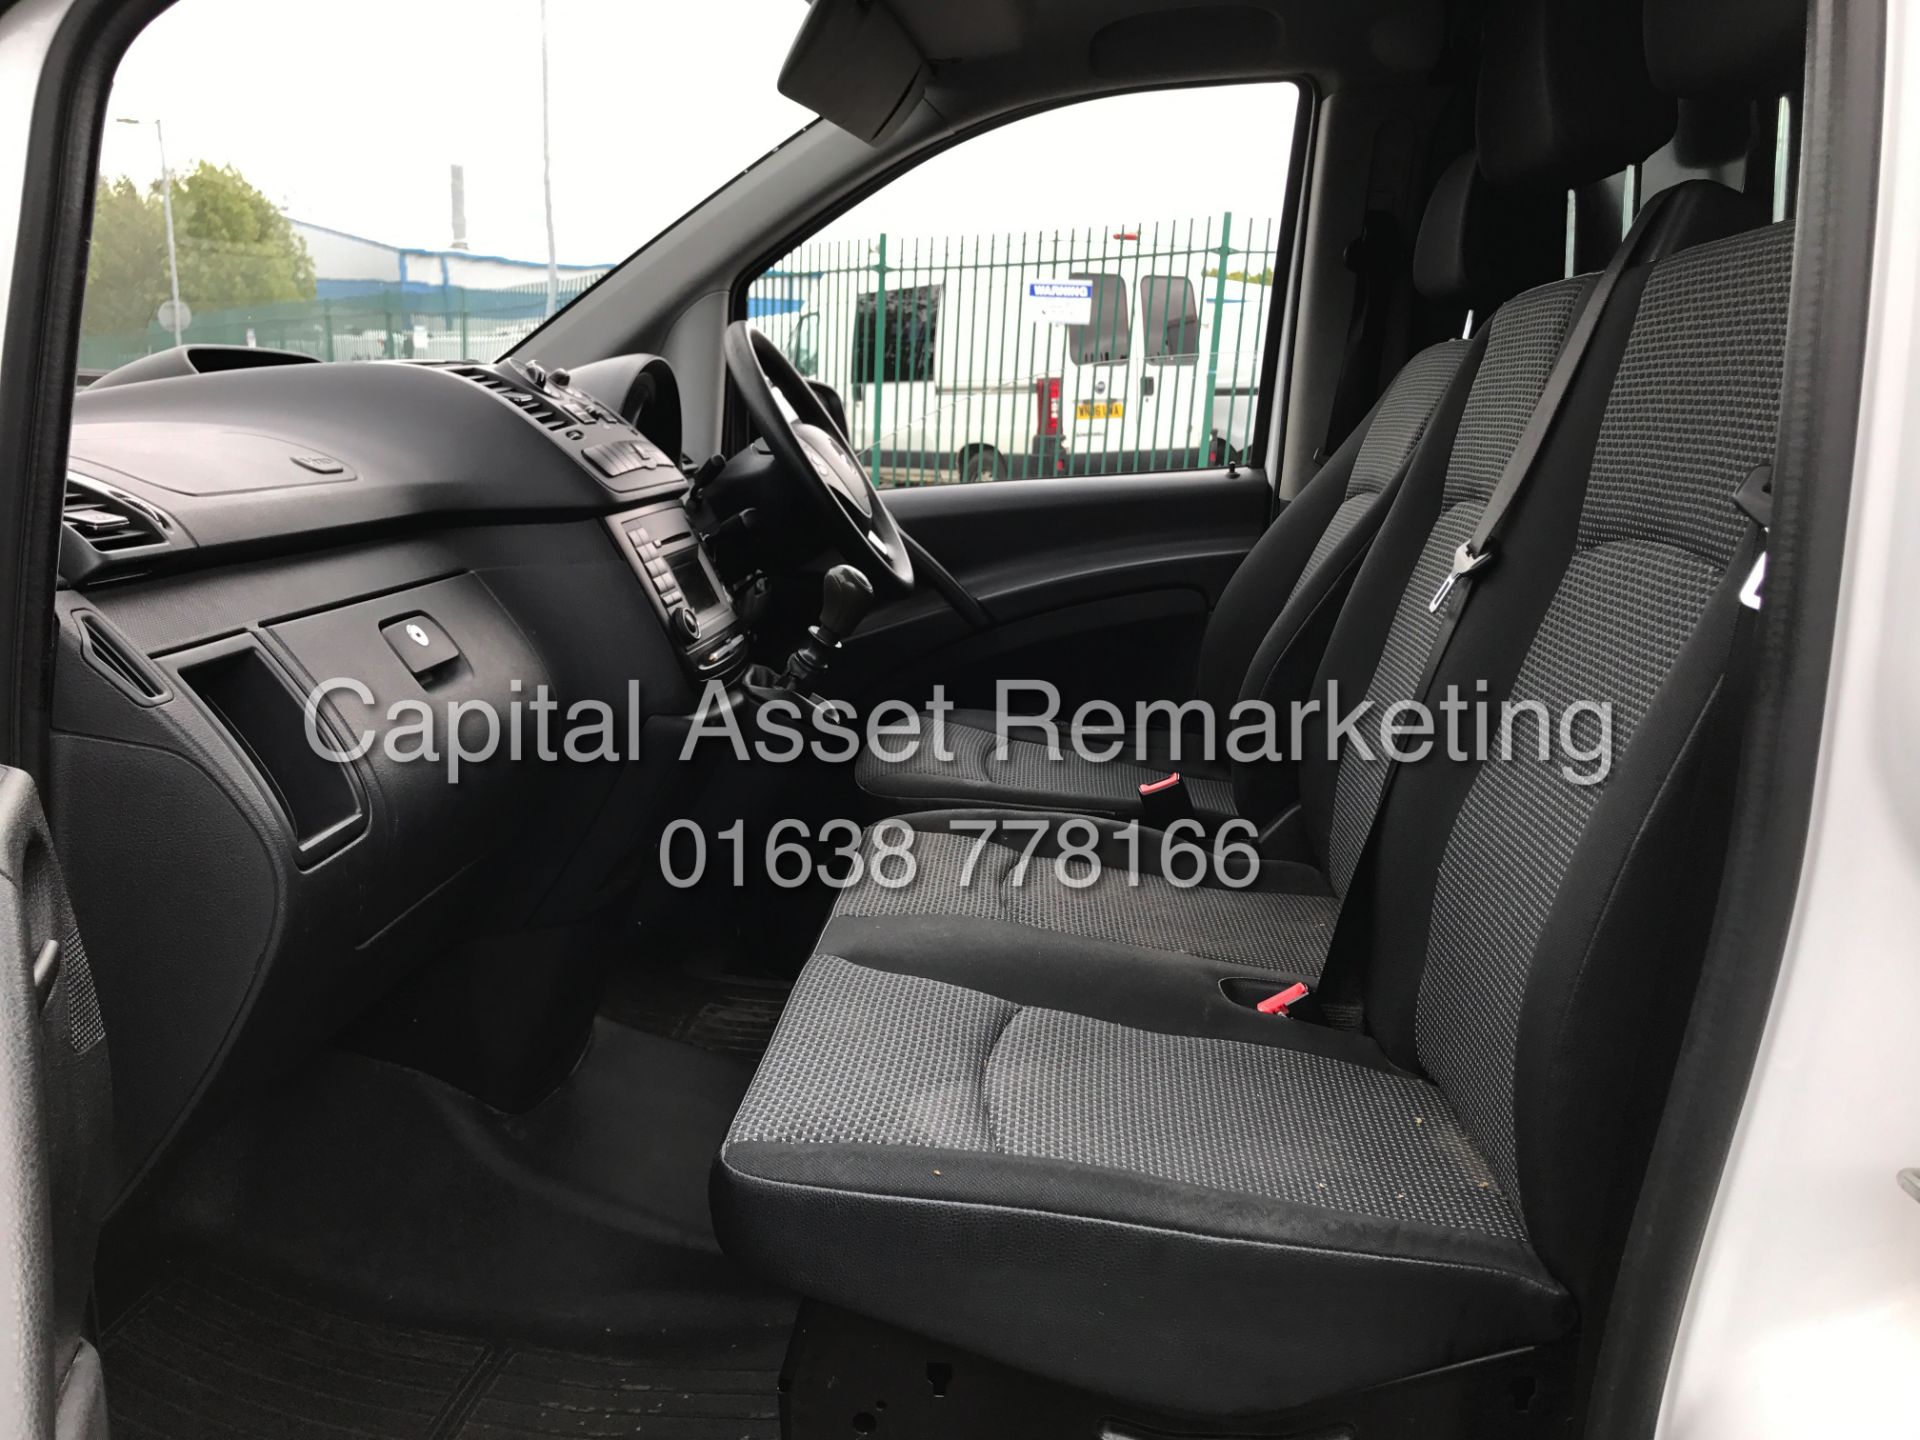 MERCEDES VITO 113CDI "136BHP - 6 SPEED" 13 REG NEW SHAPE - AIR CON - ELEC PACK - CRUISE - 1 OWNER - Image 11 of 13